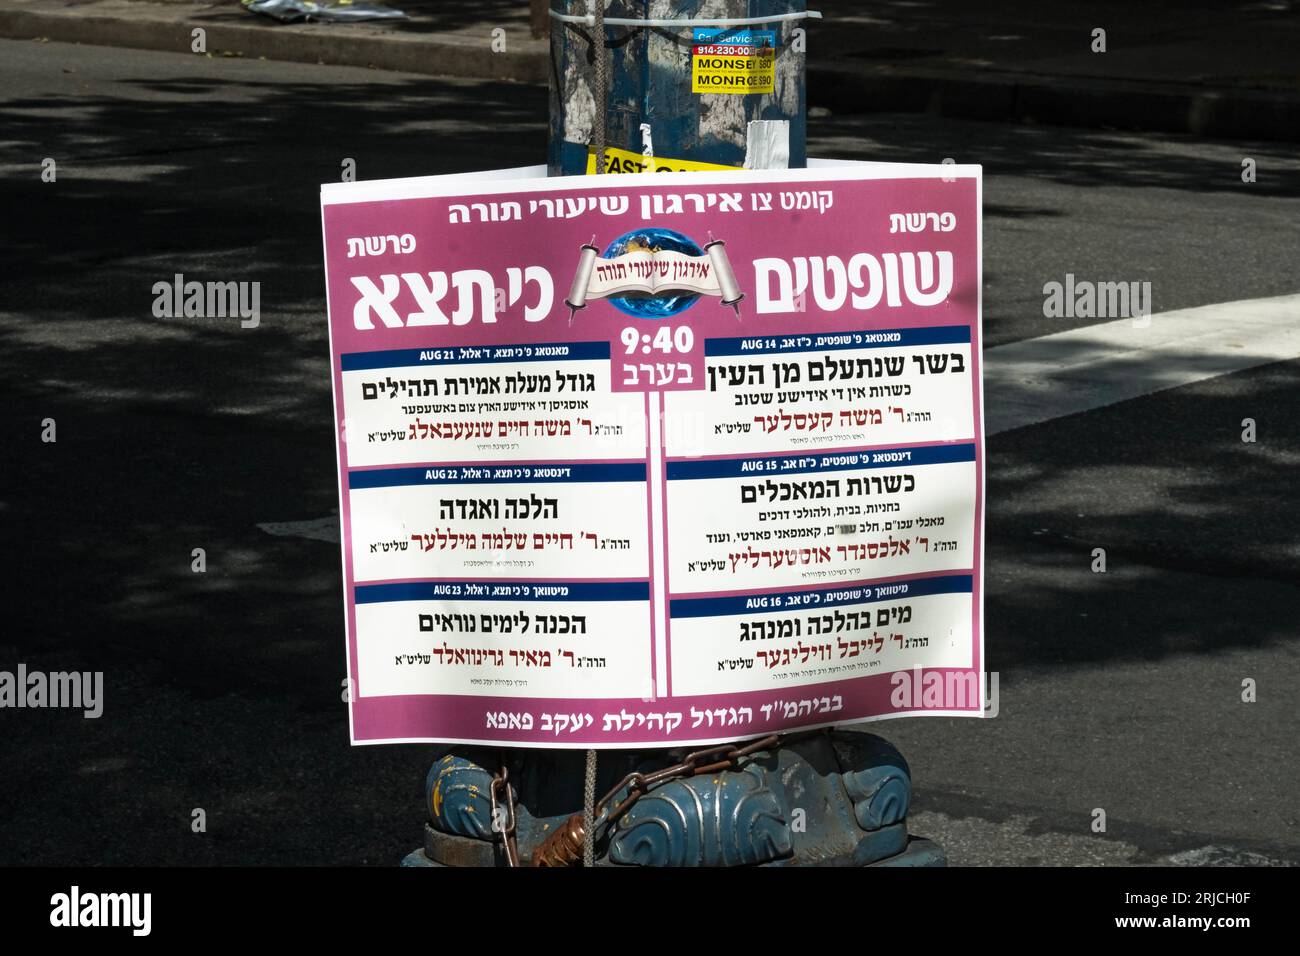 A bilingual sign from the Pupa Hasidic group listing lectures on the upcoming Sabbath's torah readings. On Lee Avenue in Williamsburg, Brooklyn, NYC. Stock Photo